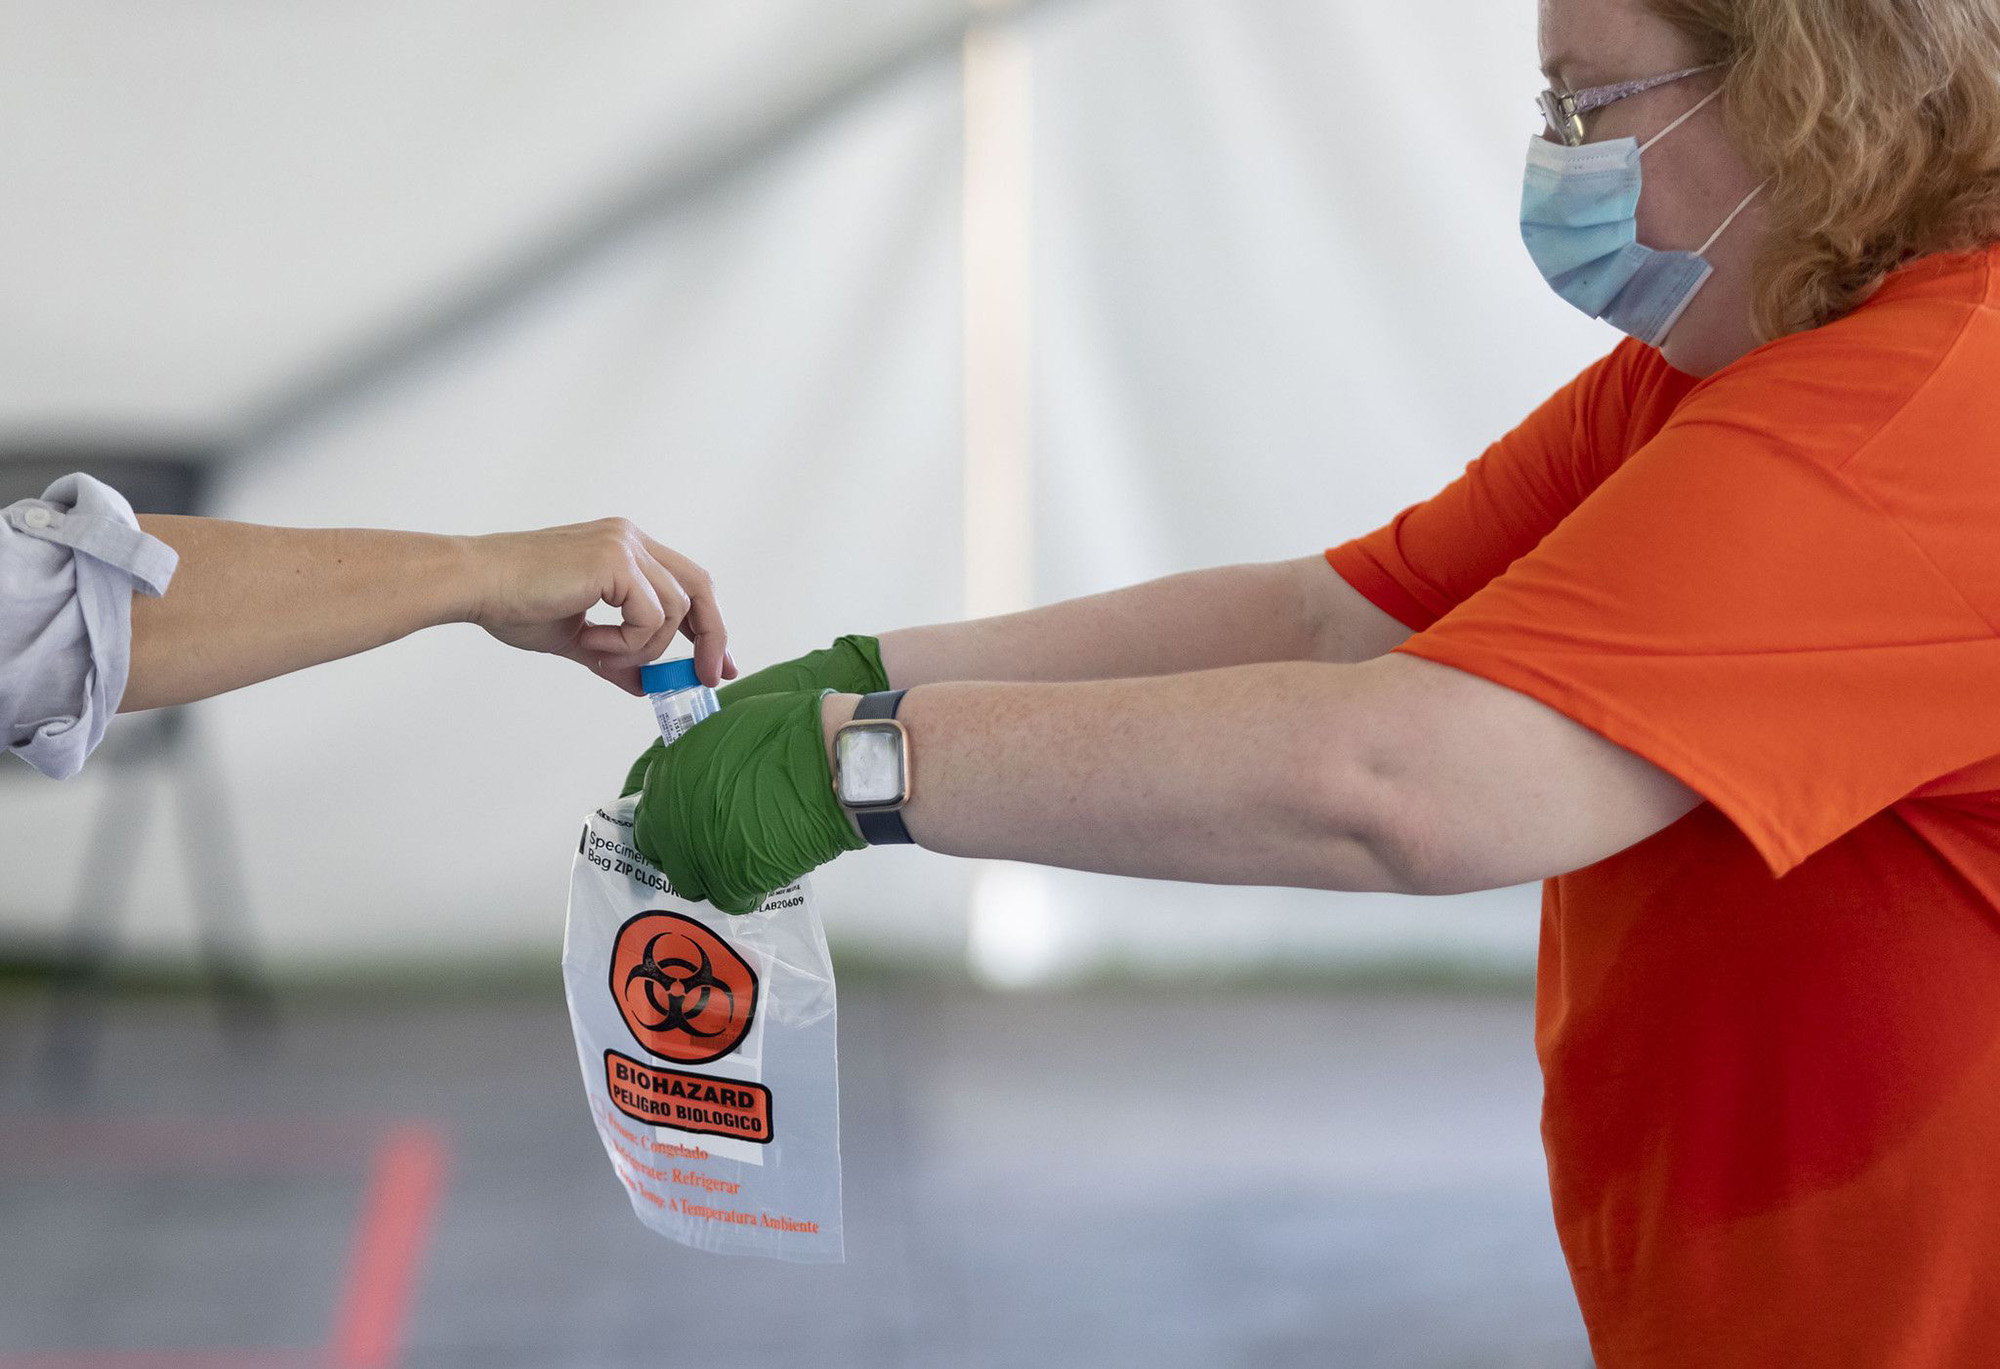 PHOTO: A COVID-19 saliva sample is collected as testing is conducted, July 7, 2020, in a tent on the University of Illinois at Urbana-Champaign campus.